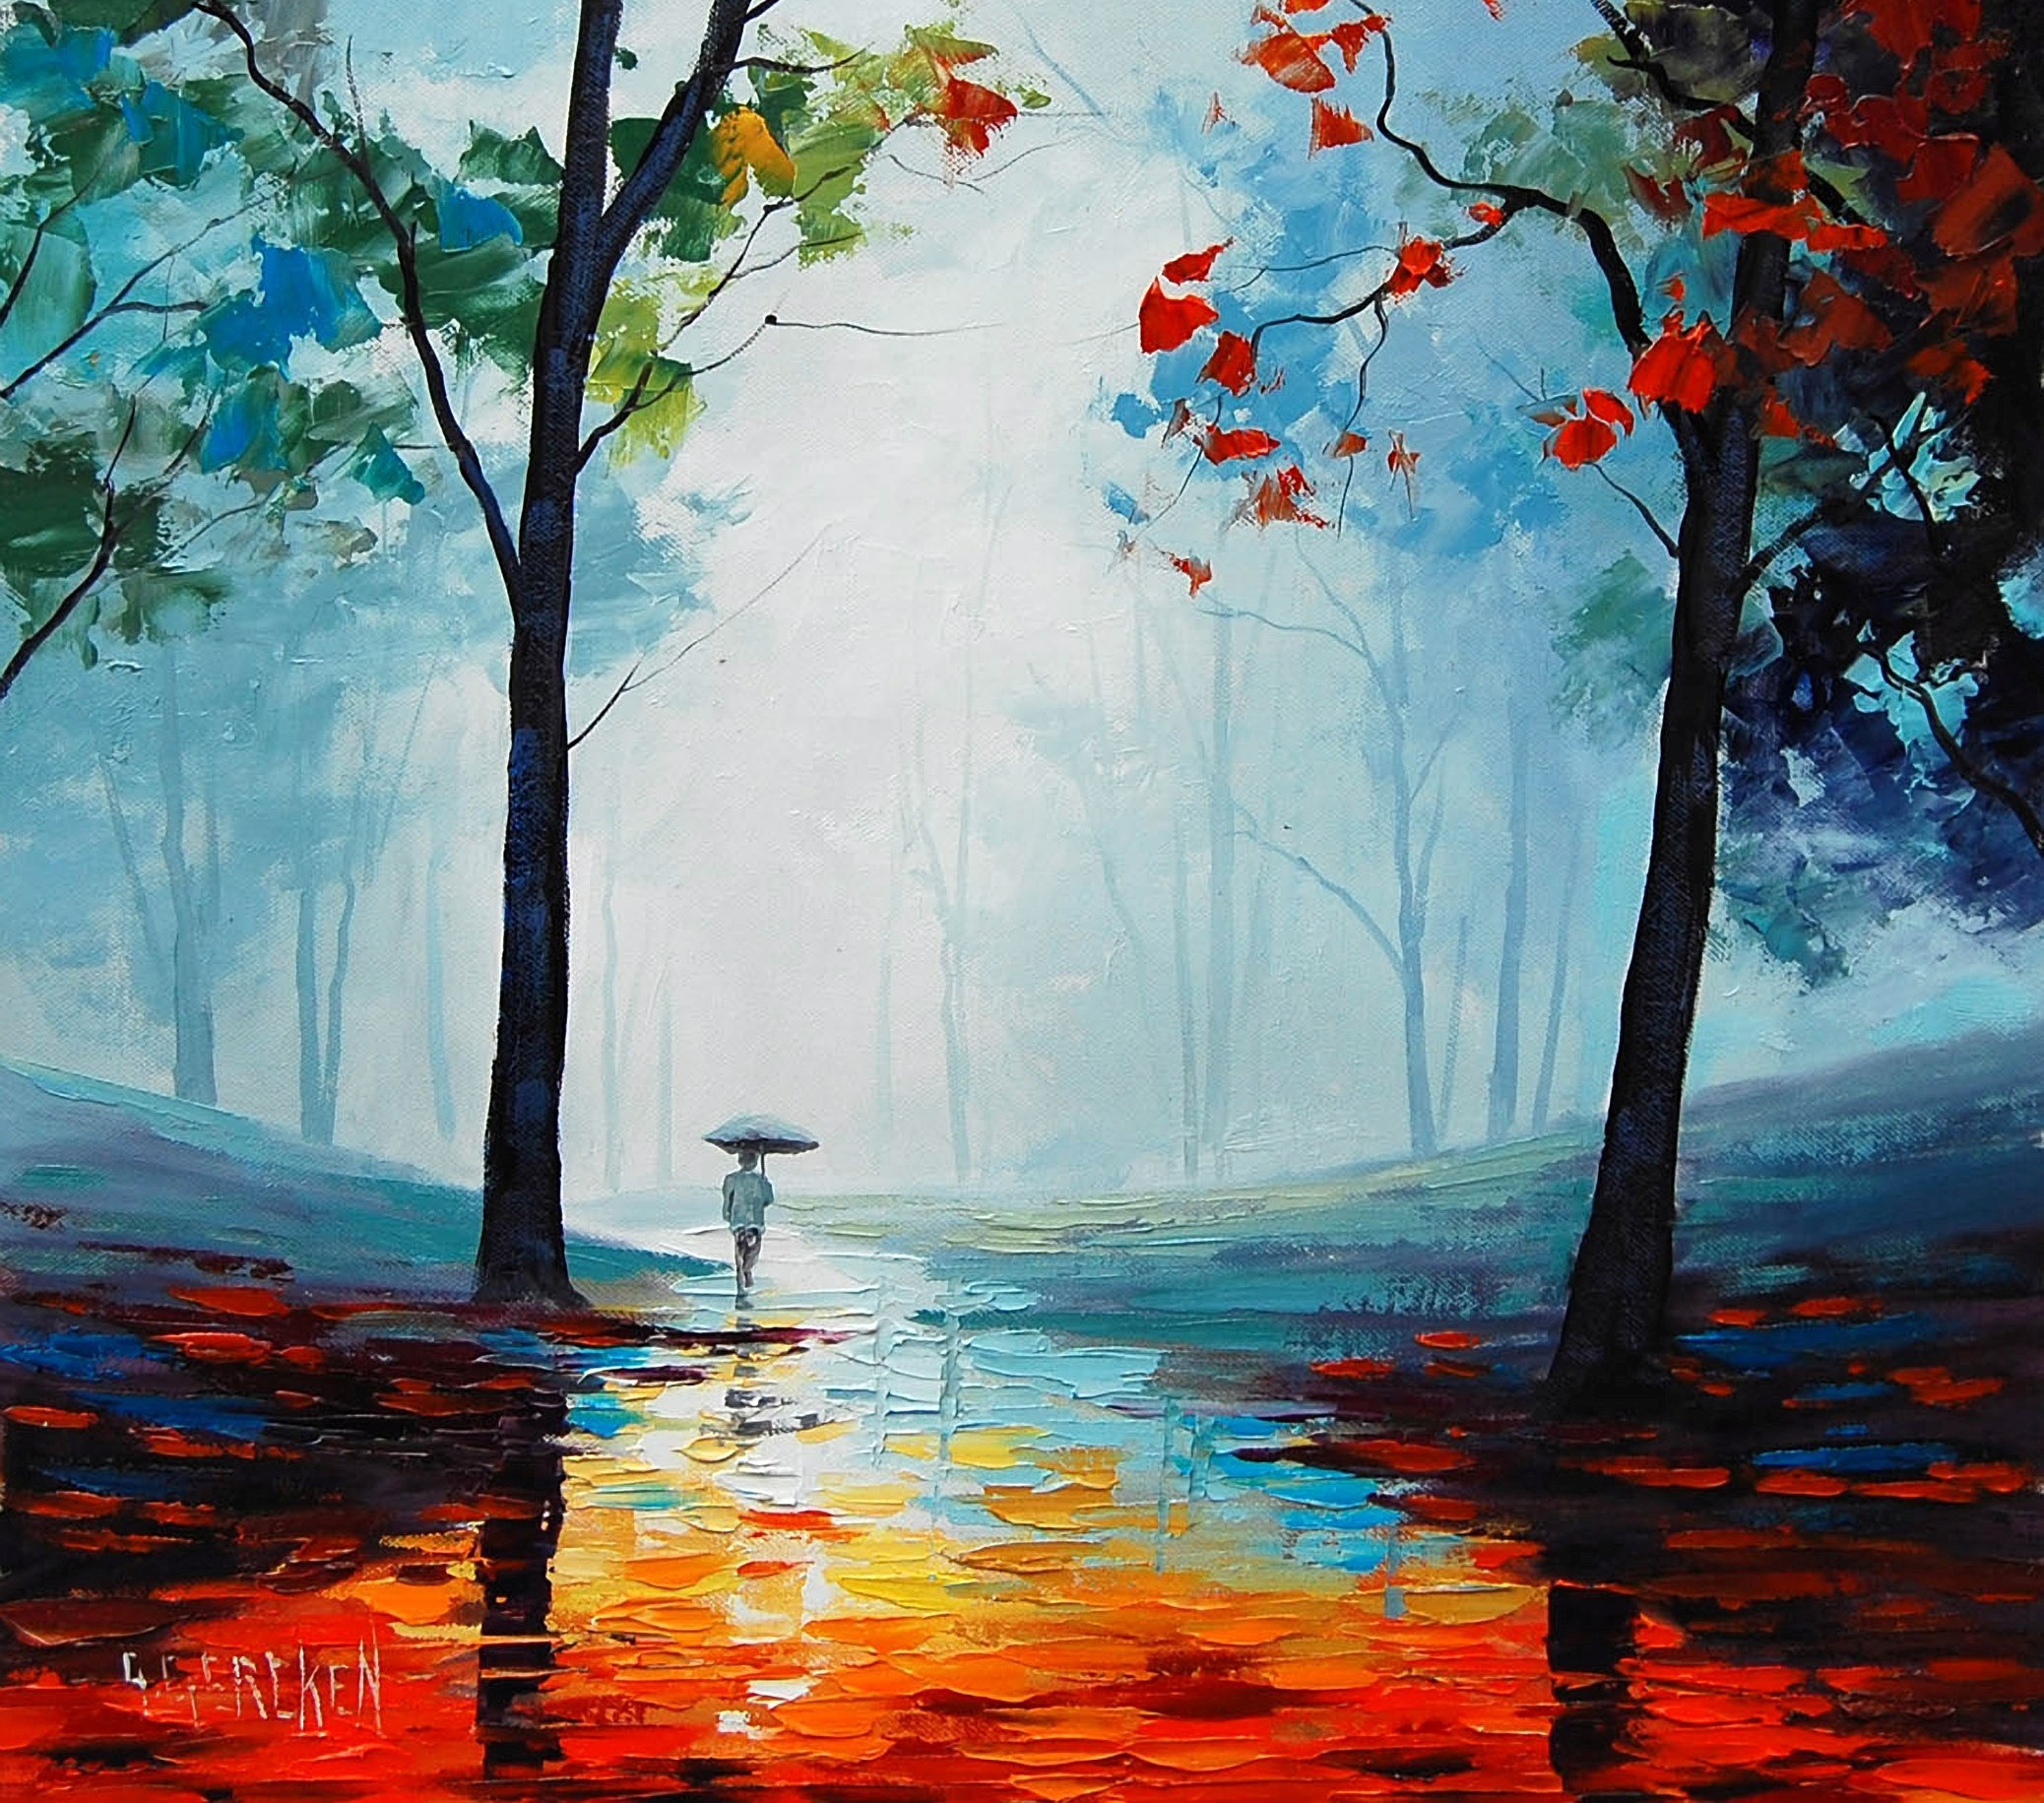 The Autumn Rain Wallpaper And Image Pictures Photos